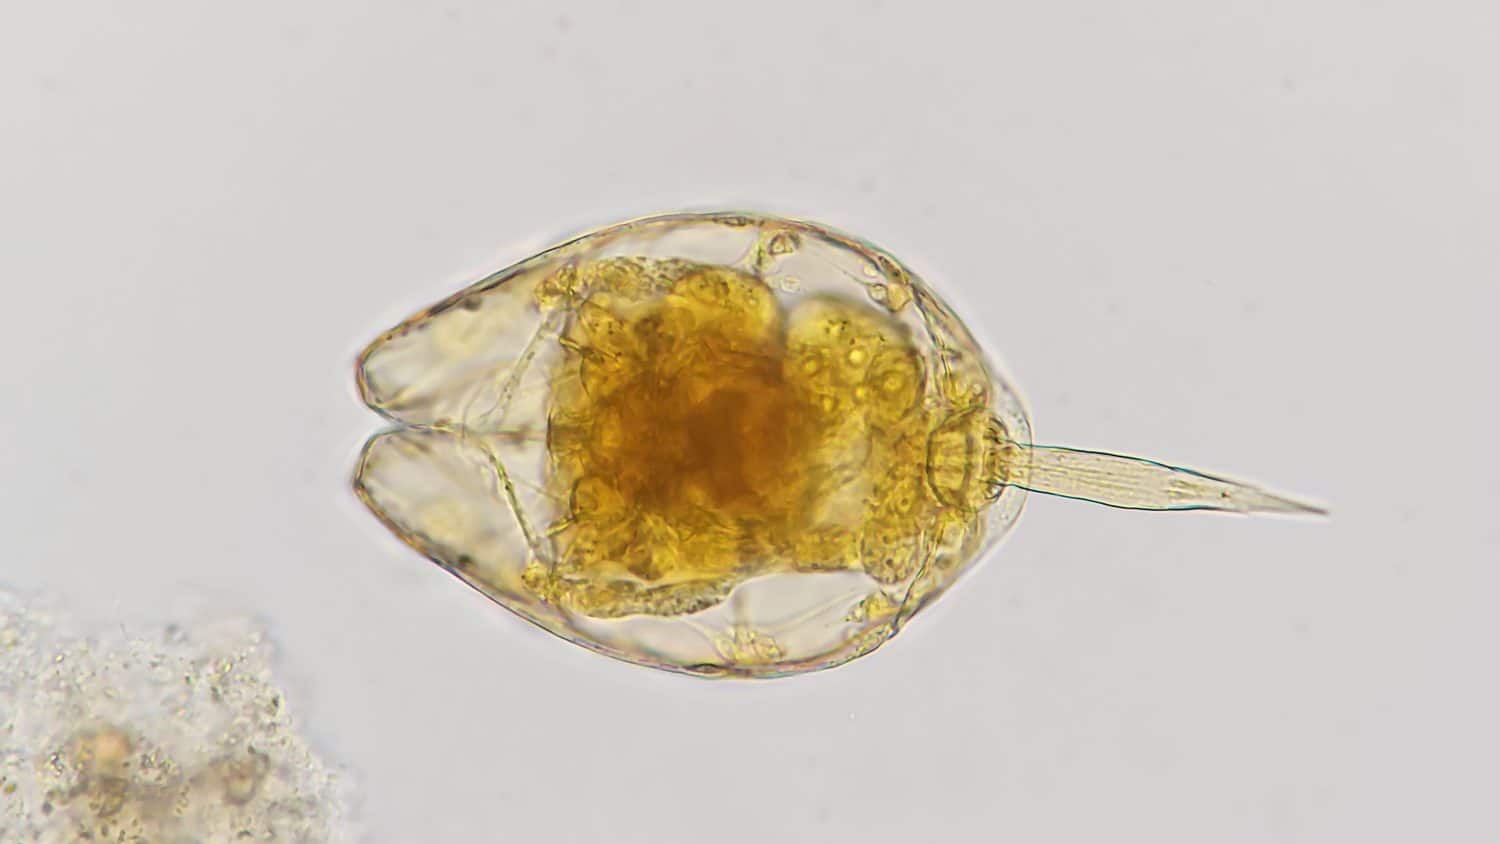 Freshwater rotifer genus Lecane. Preserved sample. Stained by Lugol's iodine. 400x magnification with selective focus